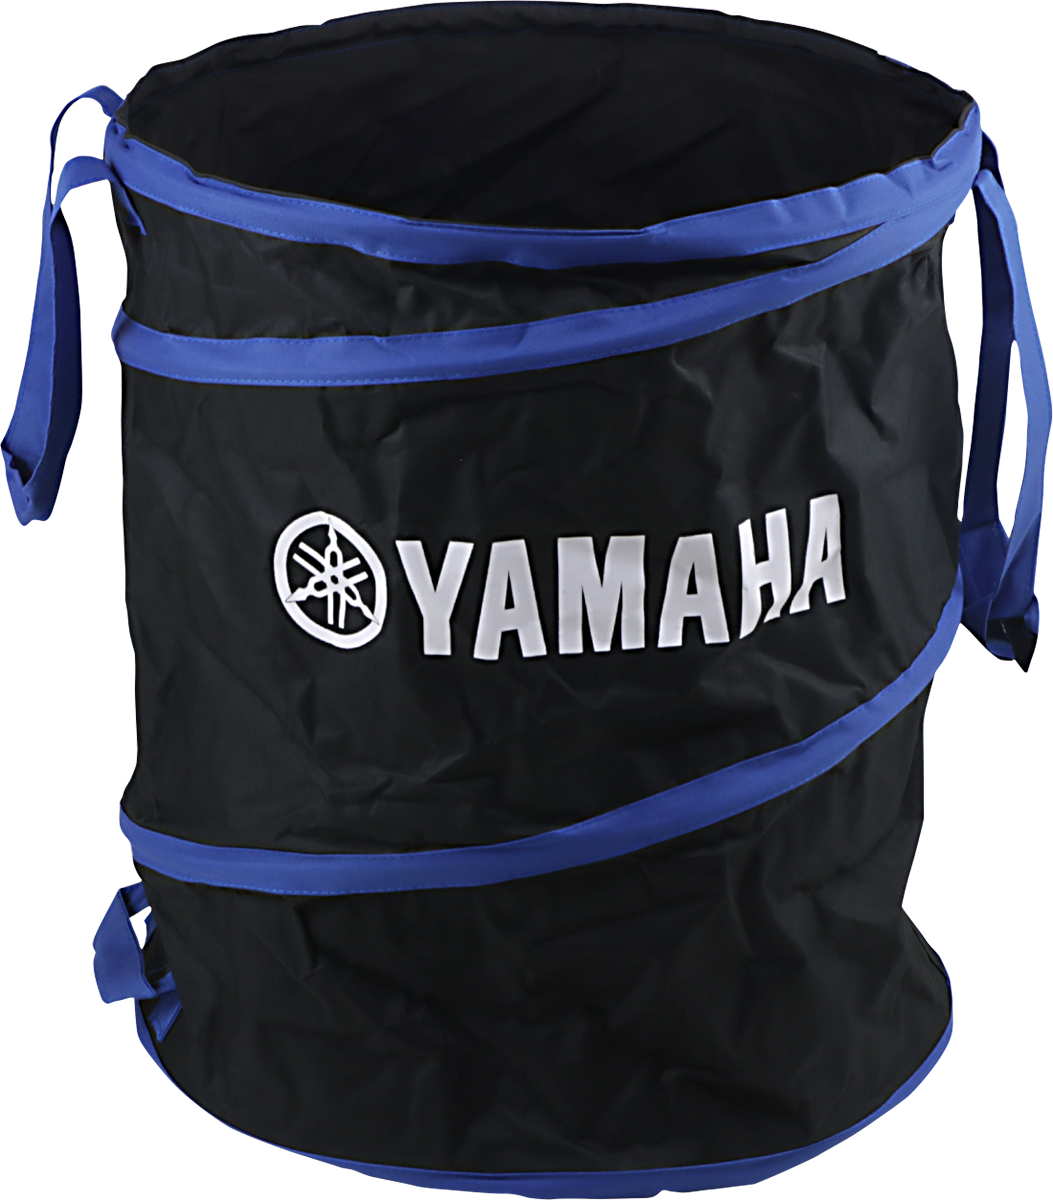 FACTORY EFFEX Trash Can - Black/Blue - Yamaha NOT CLOSEOUT ITEM 22-45262